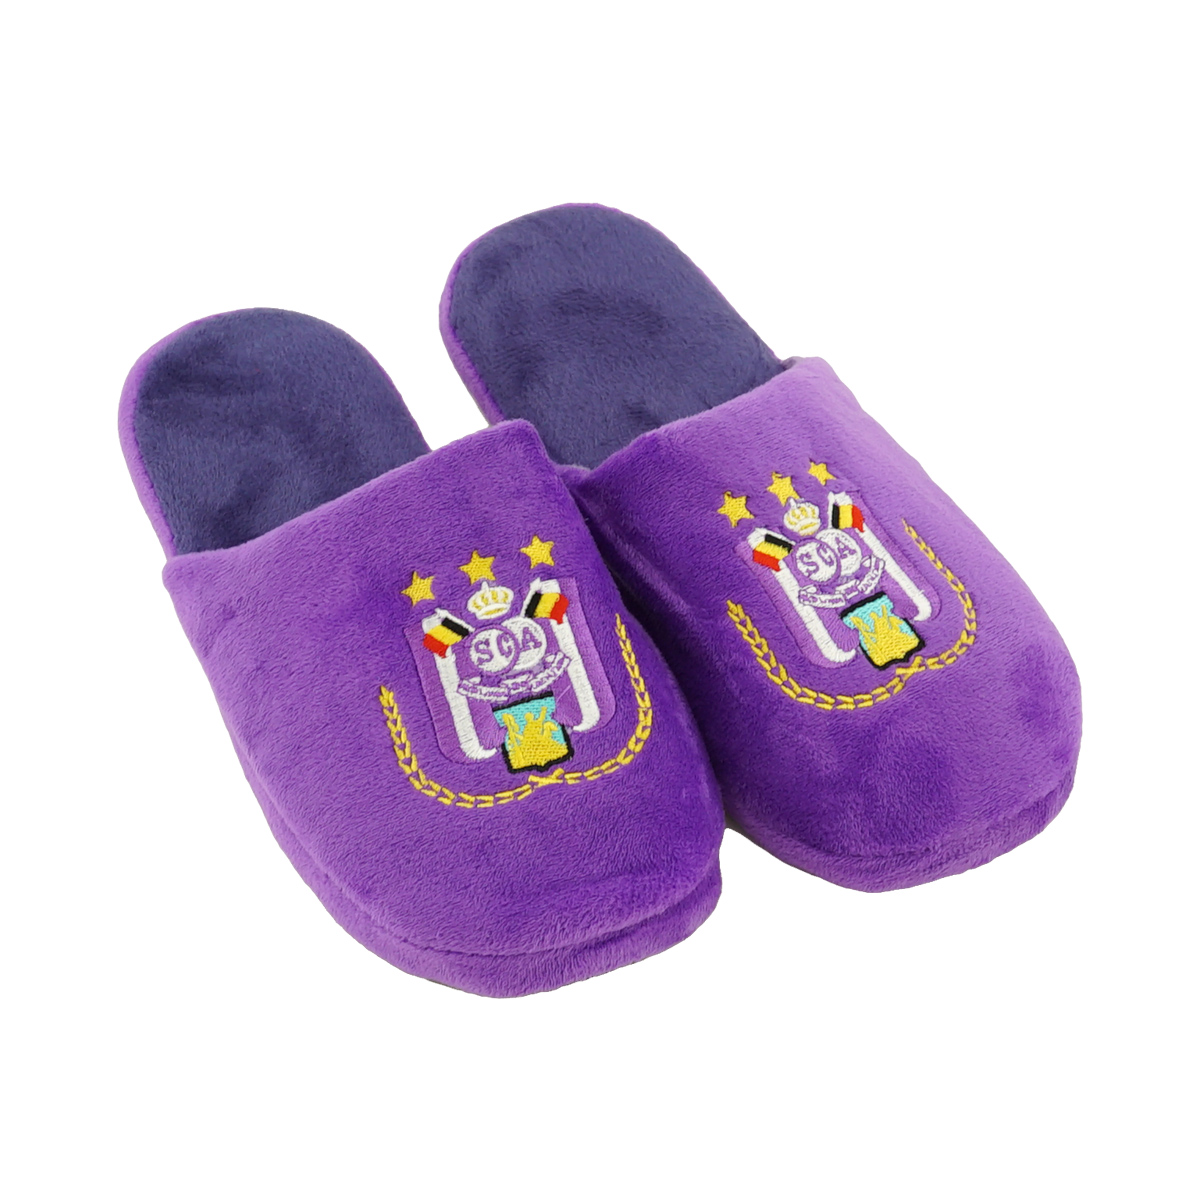 RSCA Slippers